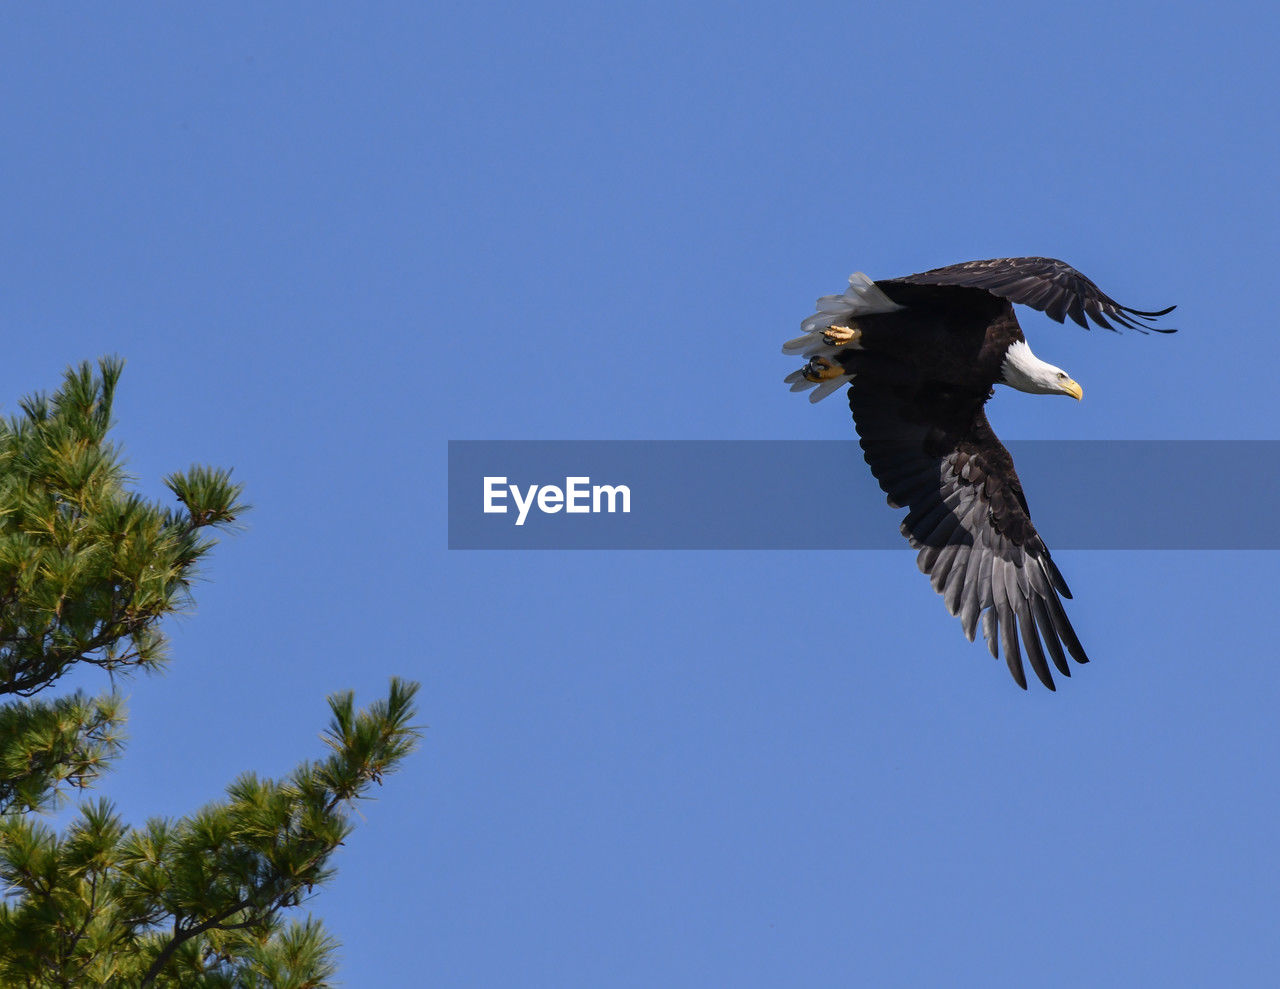 American bald eagle perched and soaring under blue sky